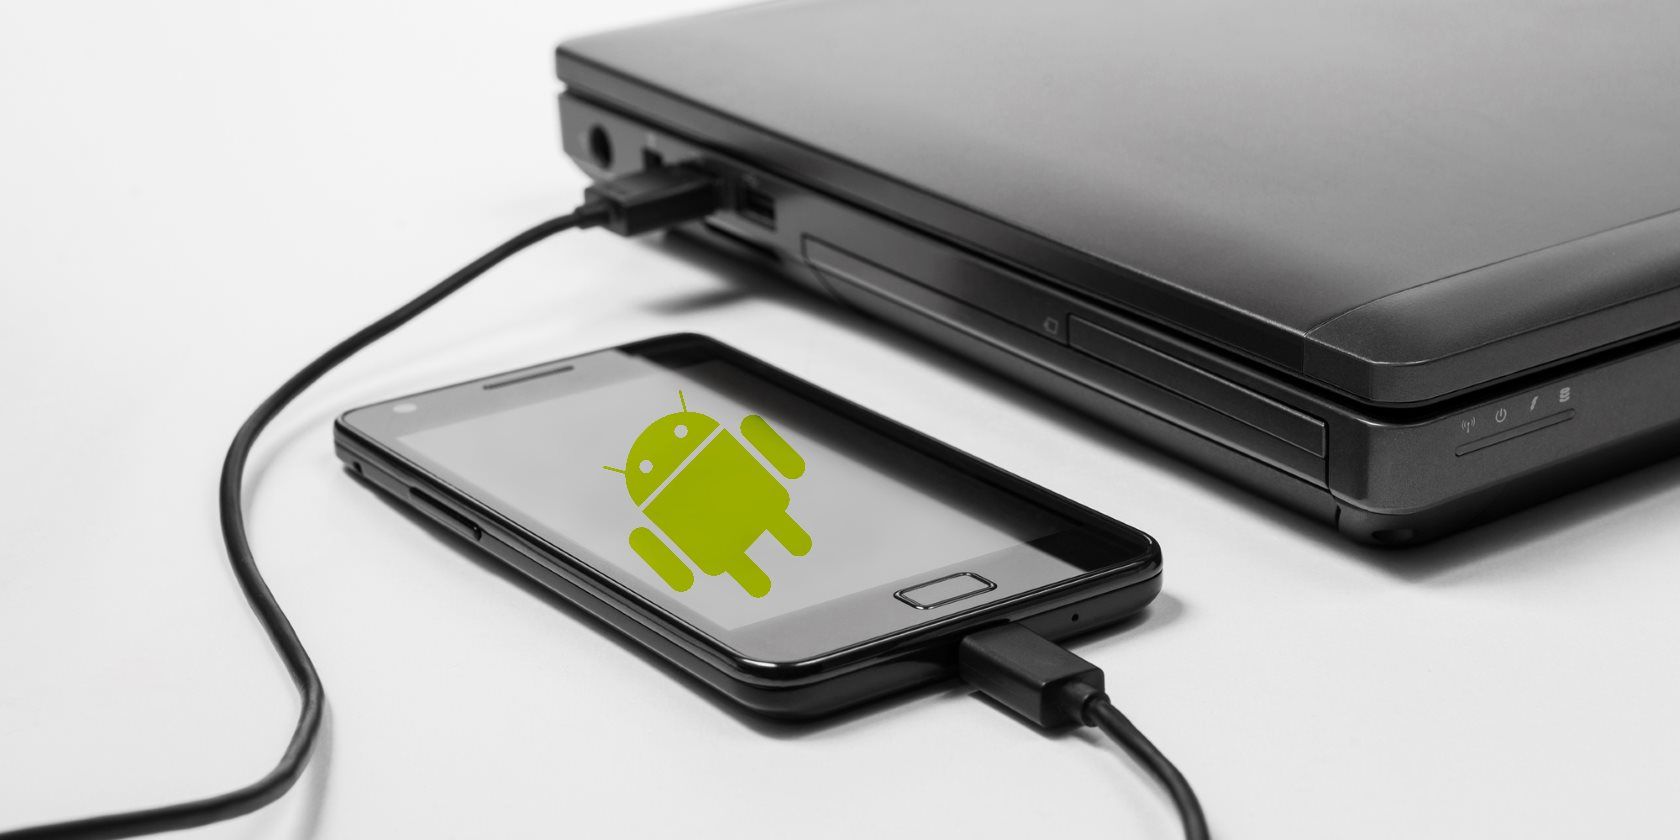 What Is USB Debugging Mode on Android? How to Enable It